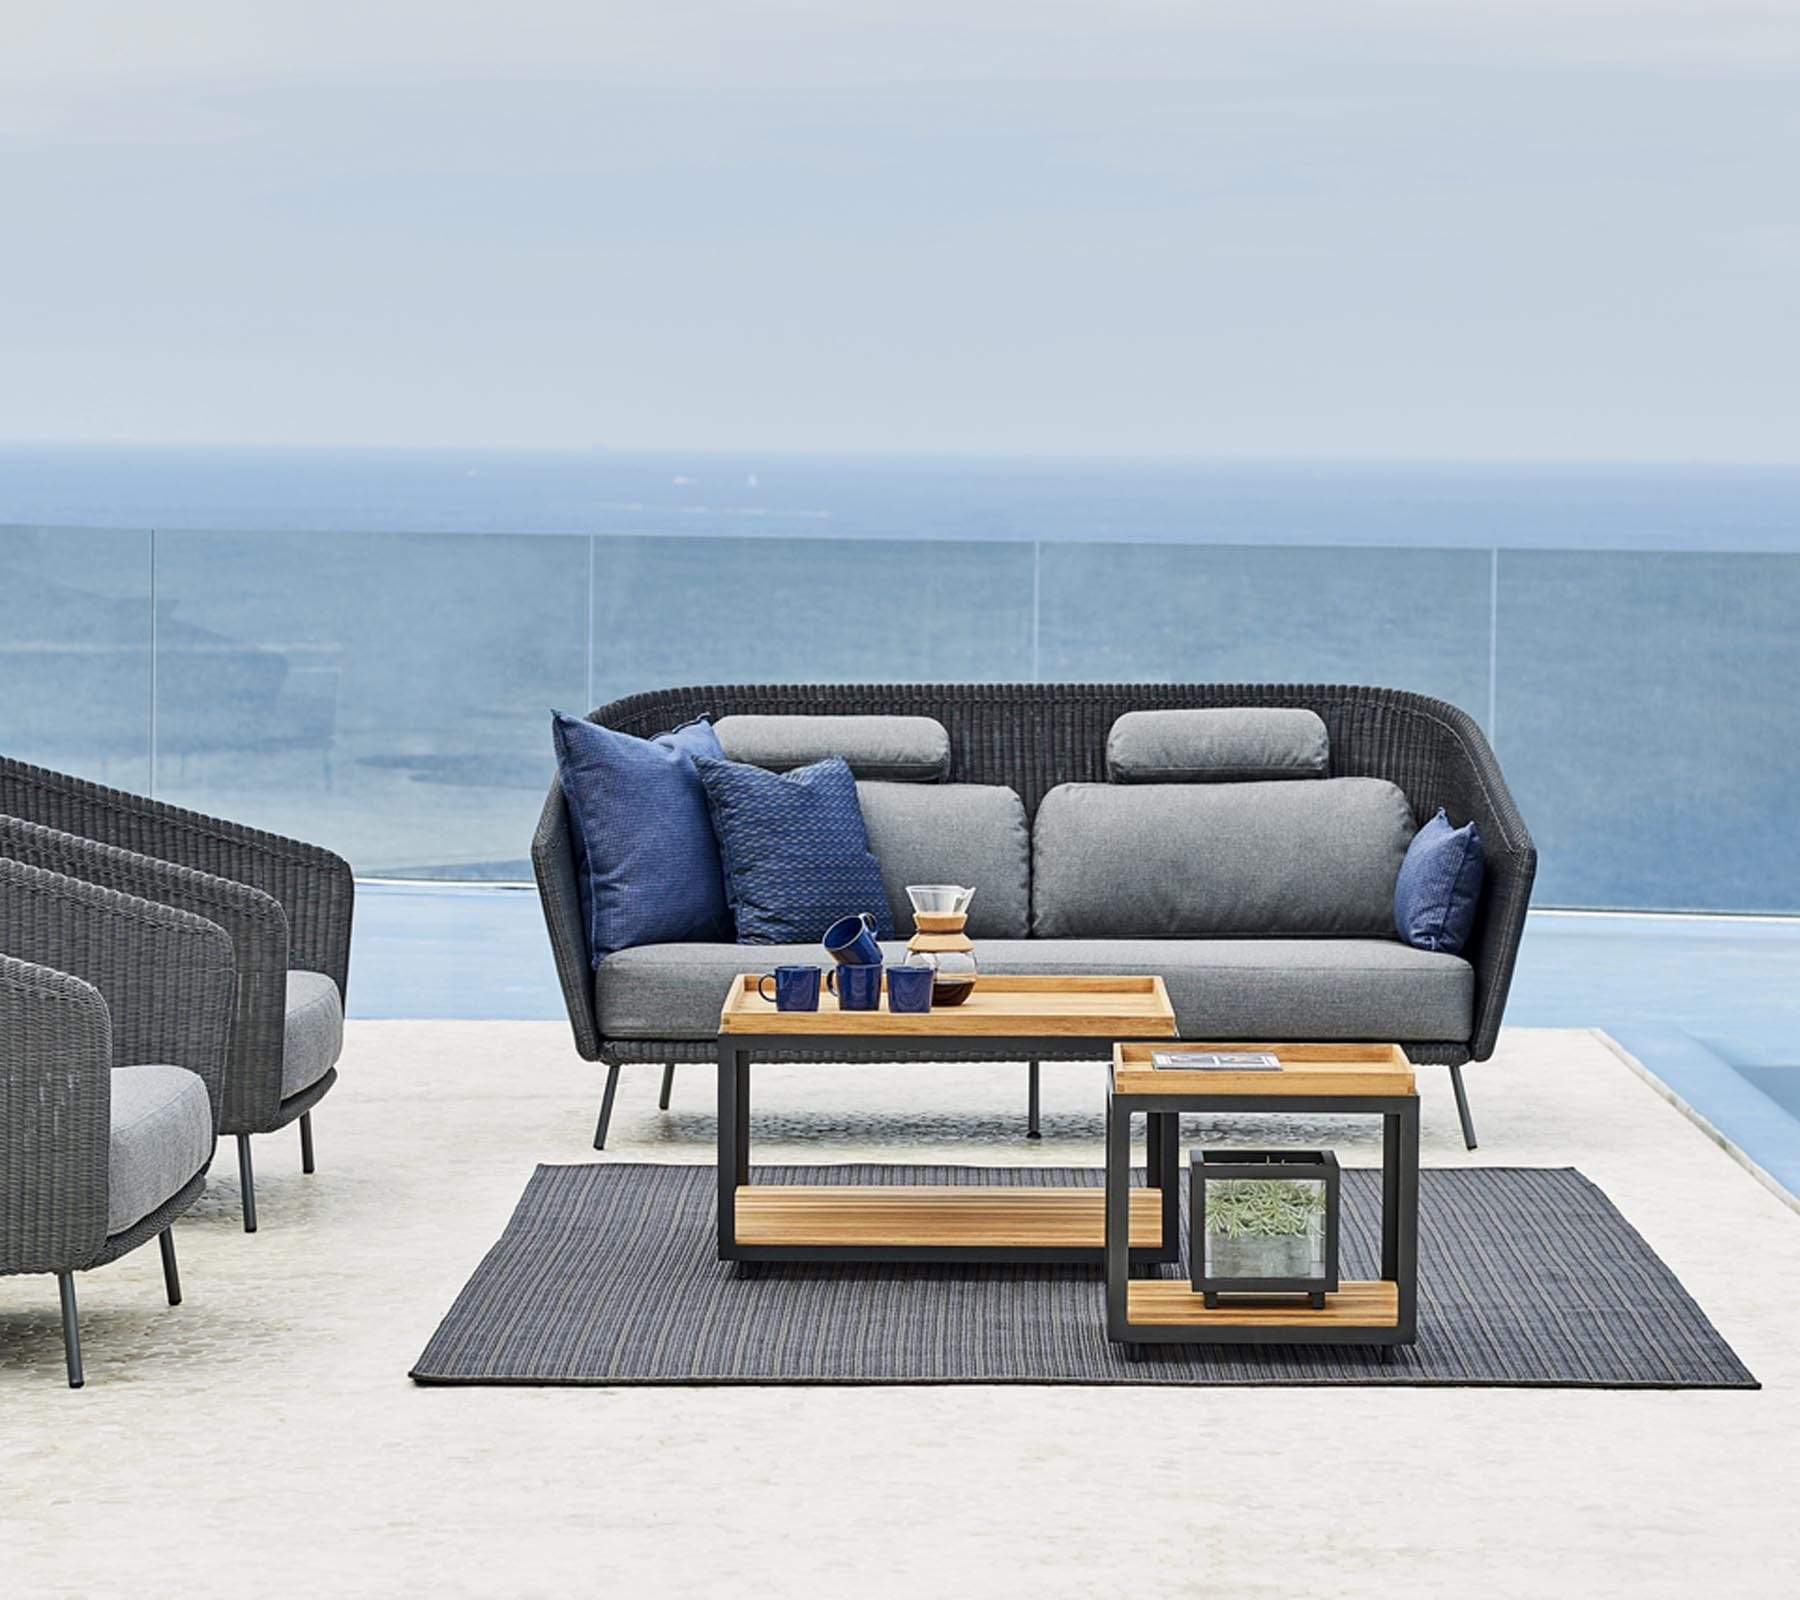 Boxhill's LEVEL Square Coffee Table Lava Grey with Teak Table Top lifestyle image with 2-seater sofa and 2 lounge chairs beside the pool 